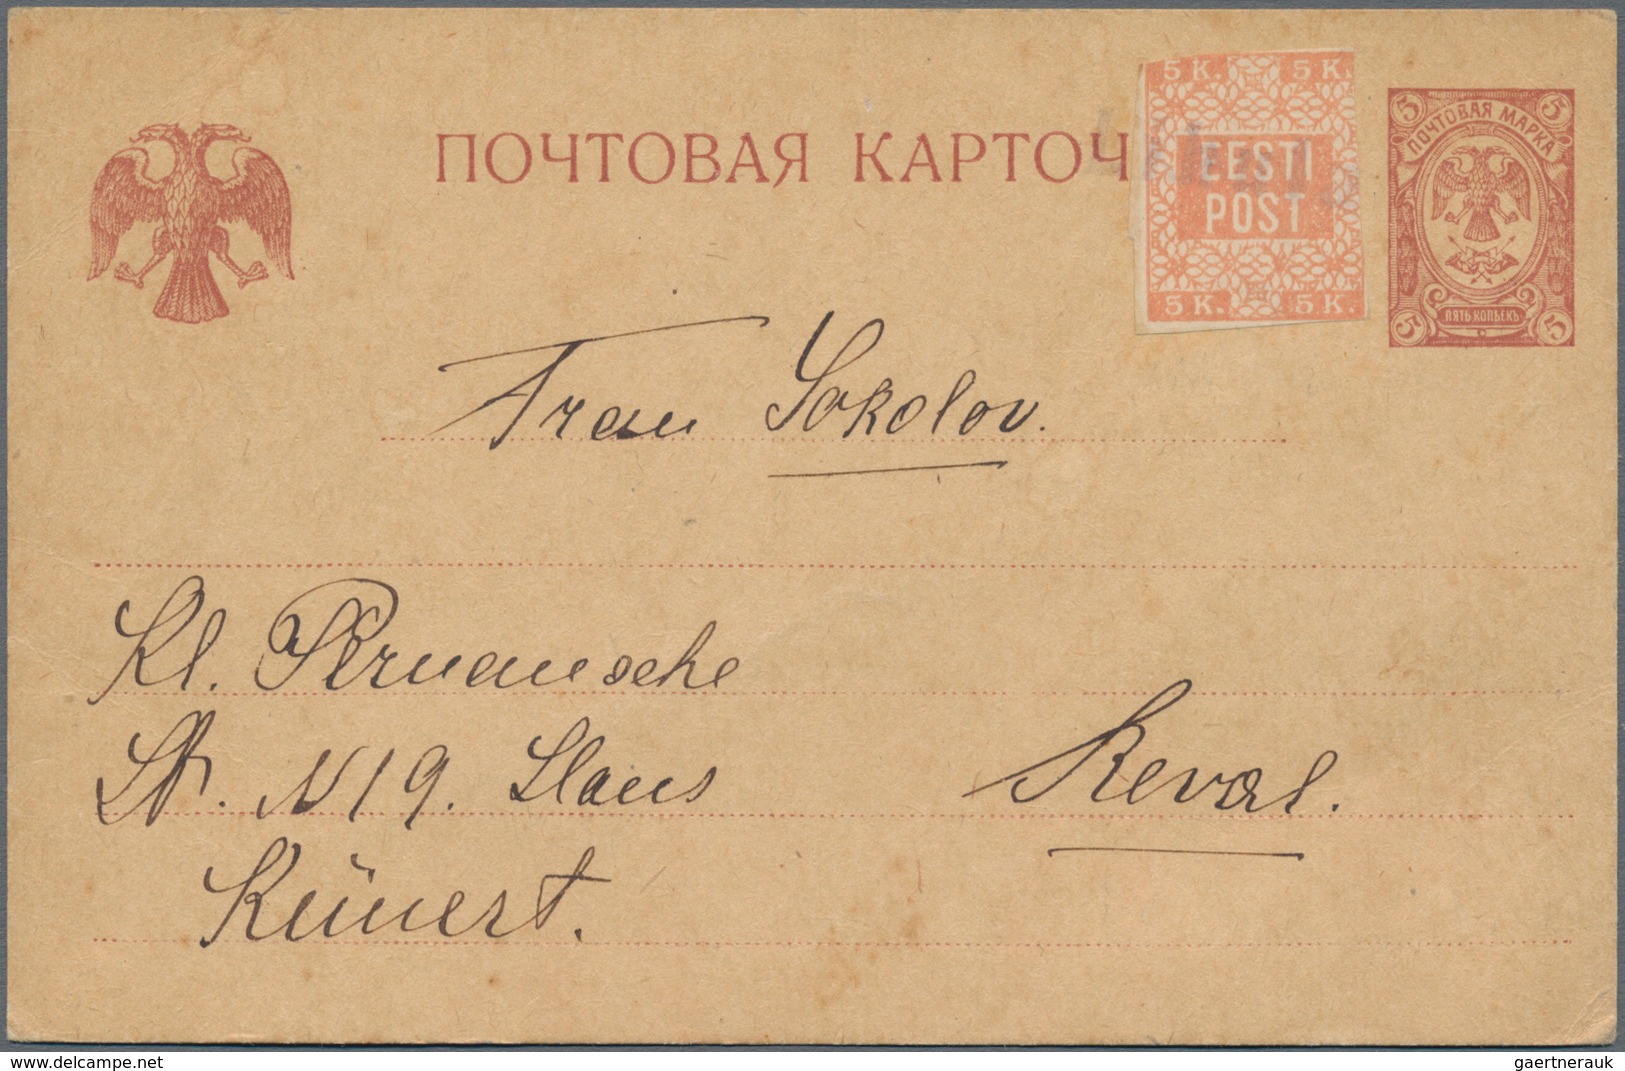 Estland - Stempel: 1918/1919, 4 covers and cards with provisional postmark LIHULA, NUIA (2) and WERR